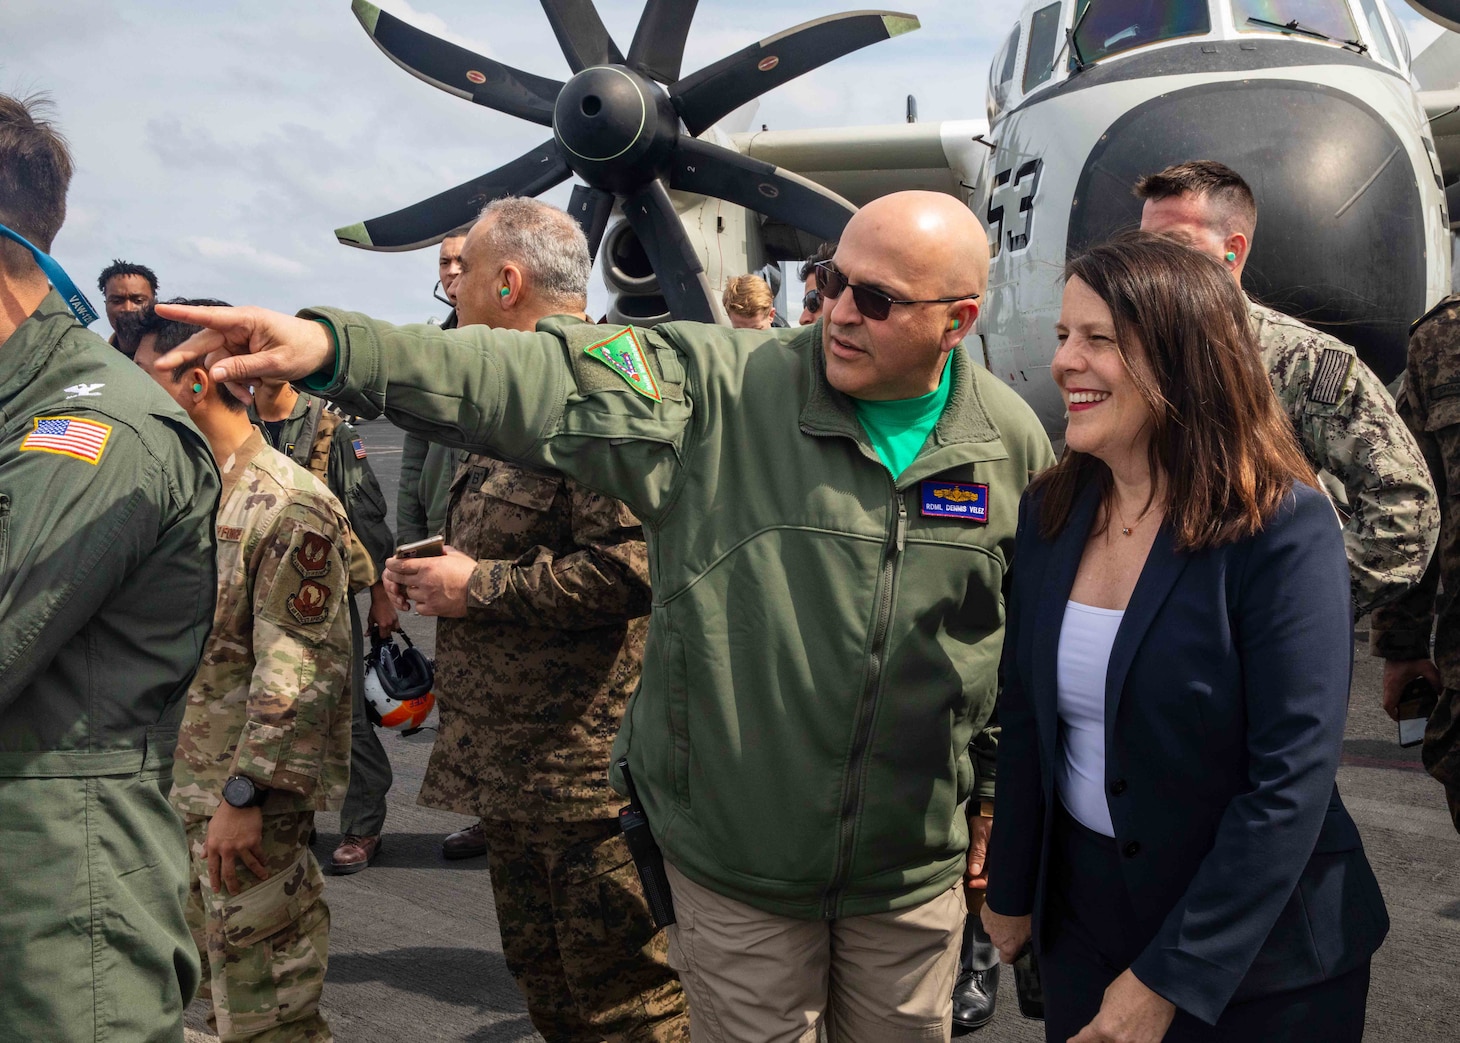 TYRRHENIAN SEA (March 22, 2023) Rear Adm. Dennis Velez, left, commander, Carrier Strike Group (CSG) 10, George H.W. Bush Carrier Strike Group, and Natasha Franceschi, U.S. Deputy Chief of Mission, U.S. Embassy Tunis observe the Electronic Attack Squadron (VAQ) 140 change of command ceremony during a key leader engagement aboard the Nimitz-class aircraft carrier USS George H.W. Bush (CVN 77), March 22, 2023. The George H.W. Bush Carrier Strike Group is on a scheduled deployment in the U.S. Naval Forces Europe area of operations, employed by U.S. Sixth Fleet to defend U.S., allied, and partner interests.